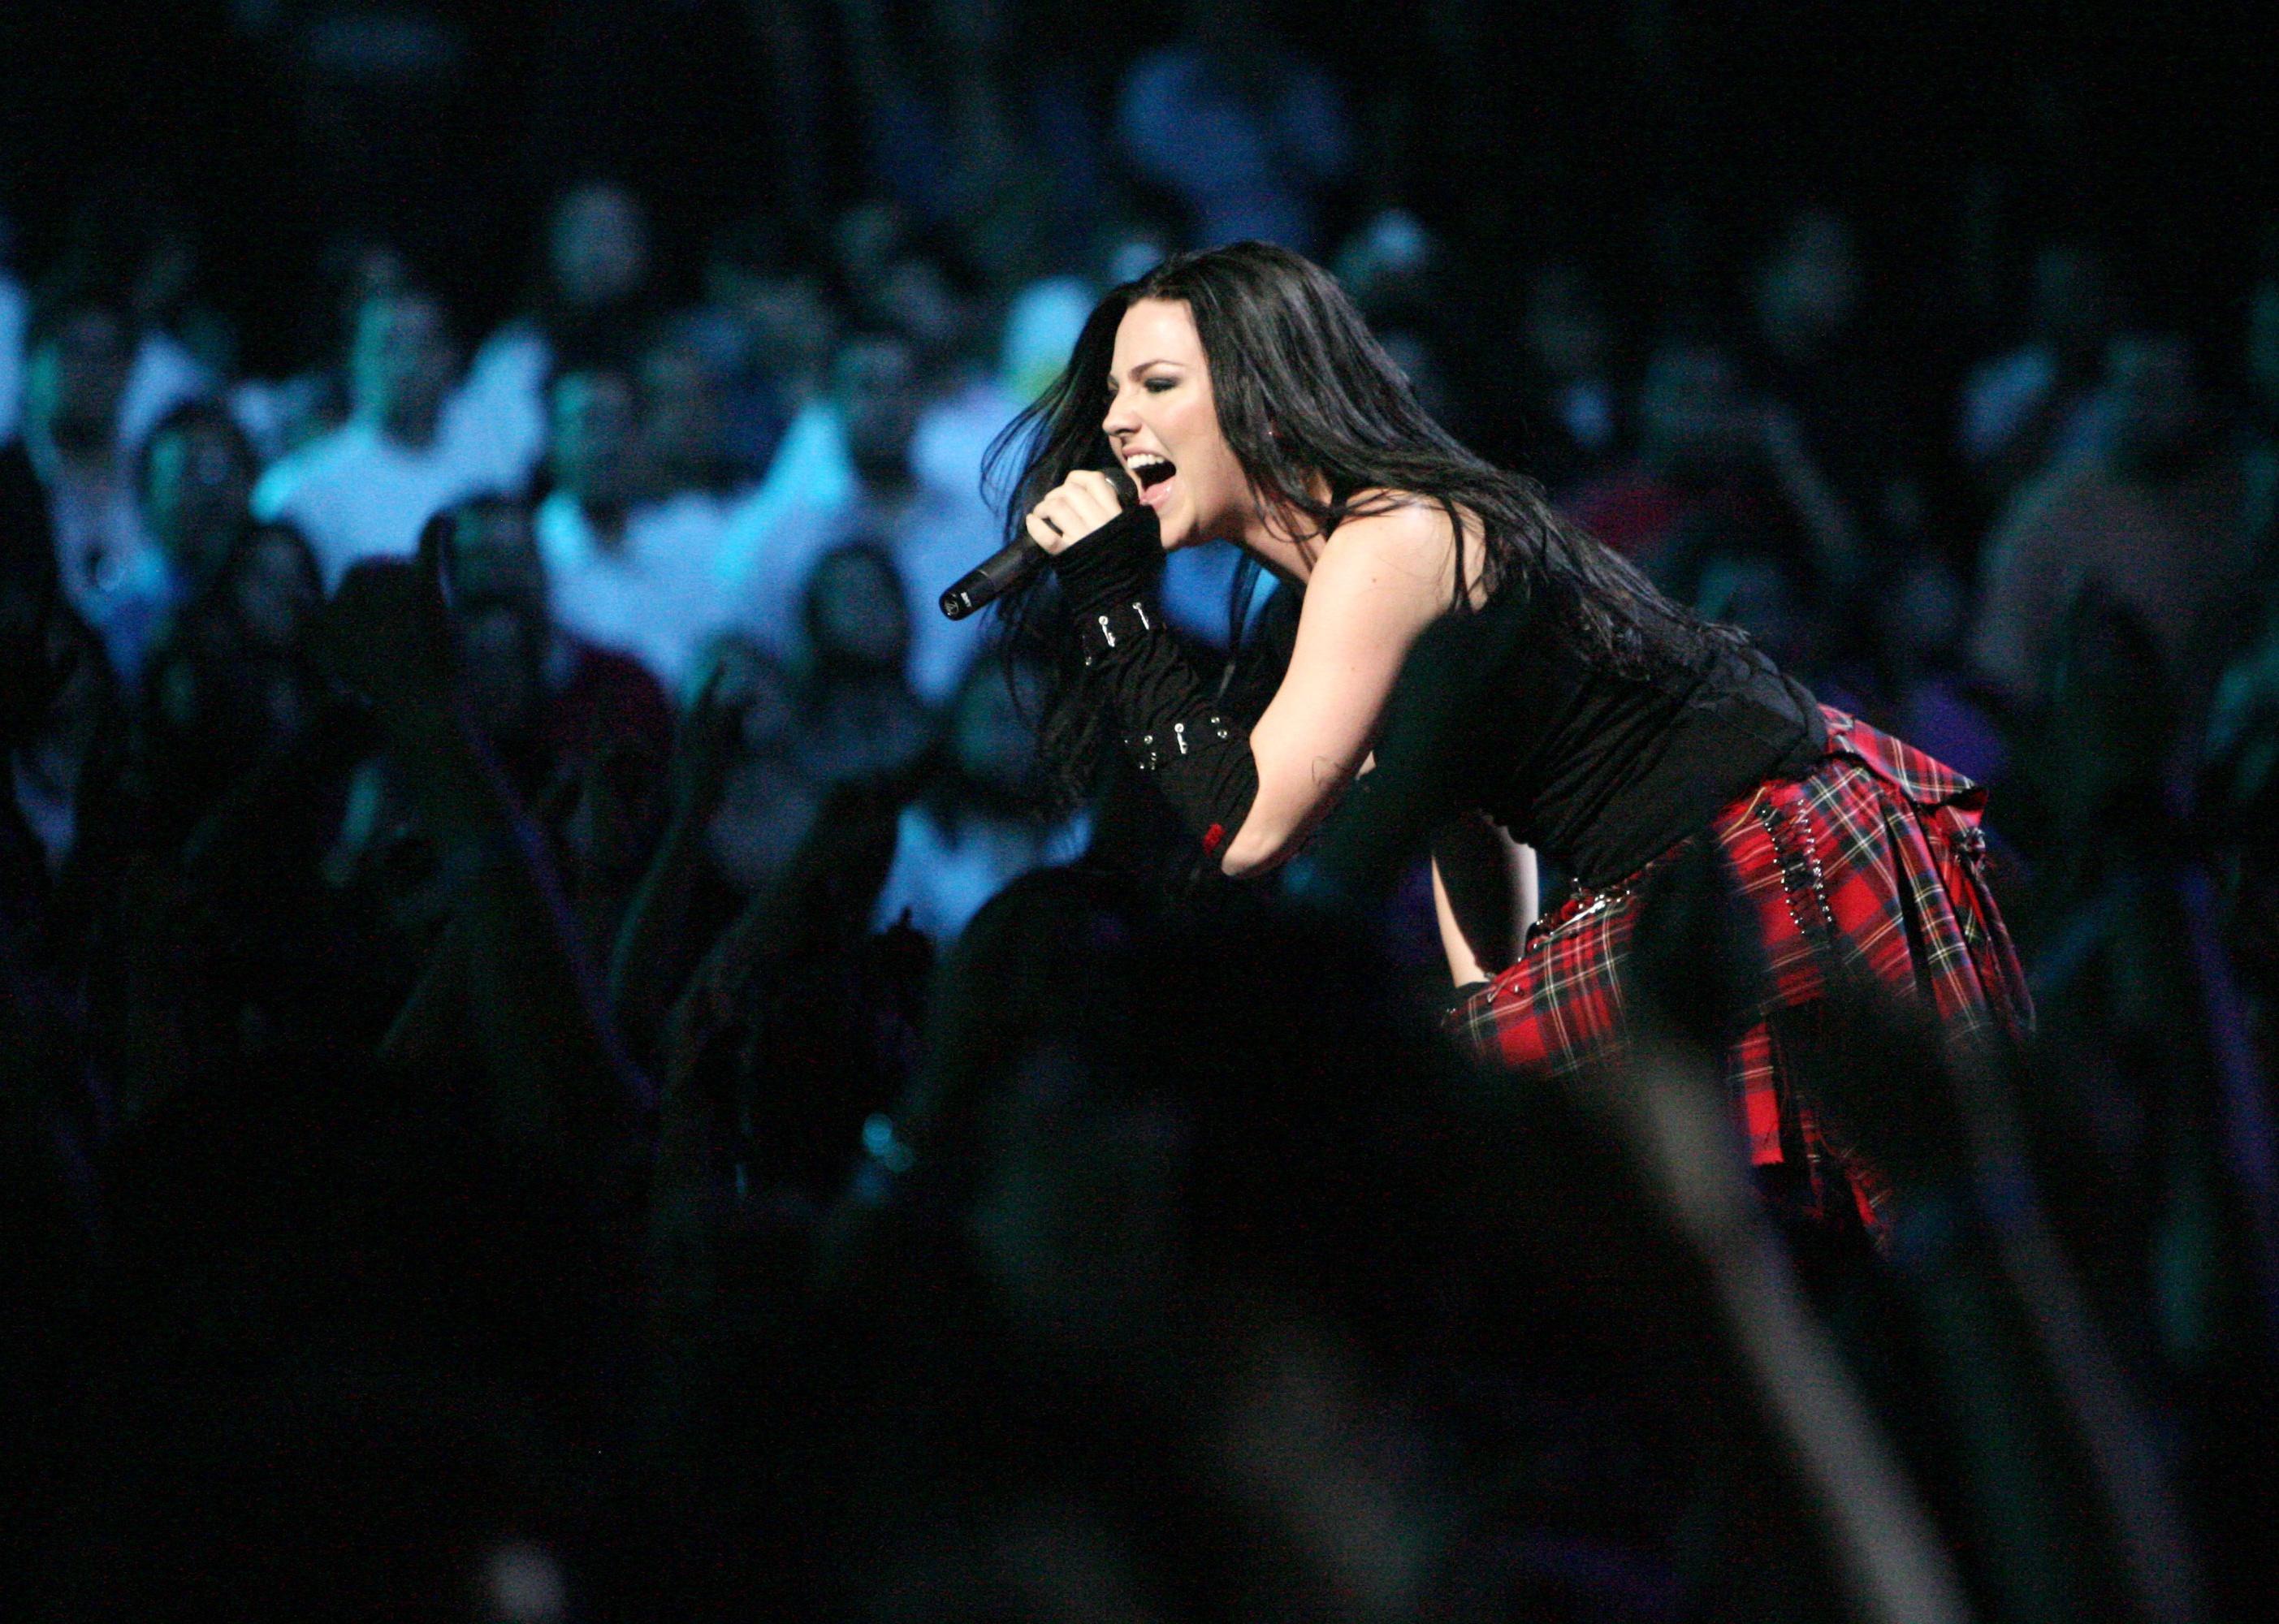 Evanescence in a black top and plaid skirt performing